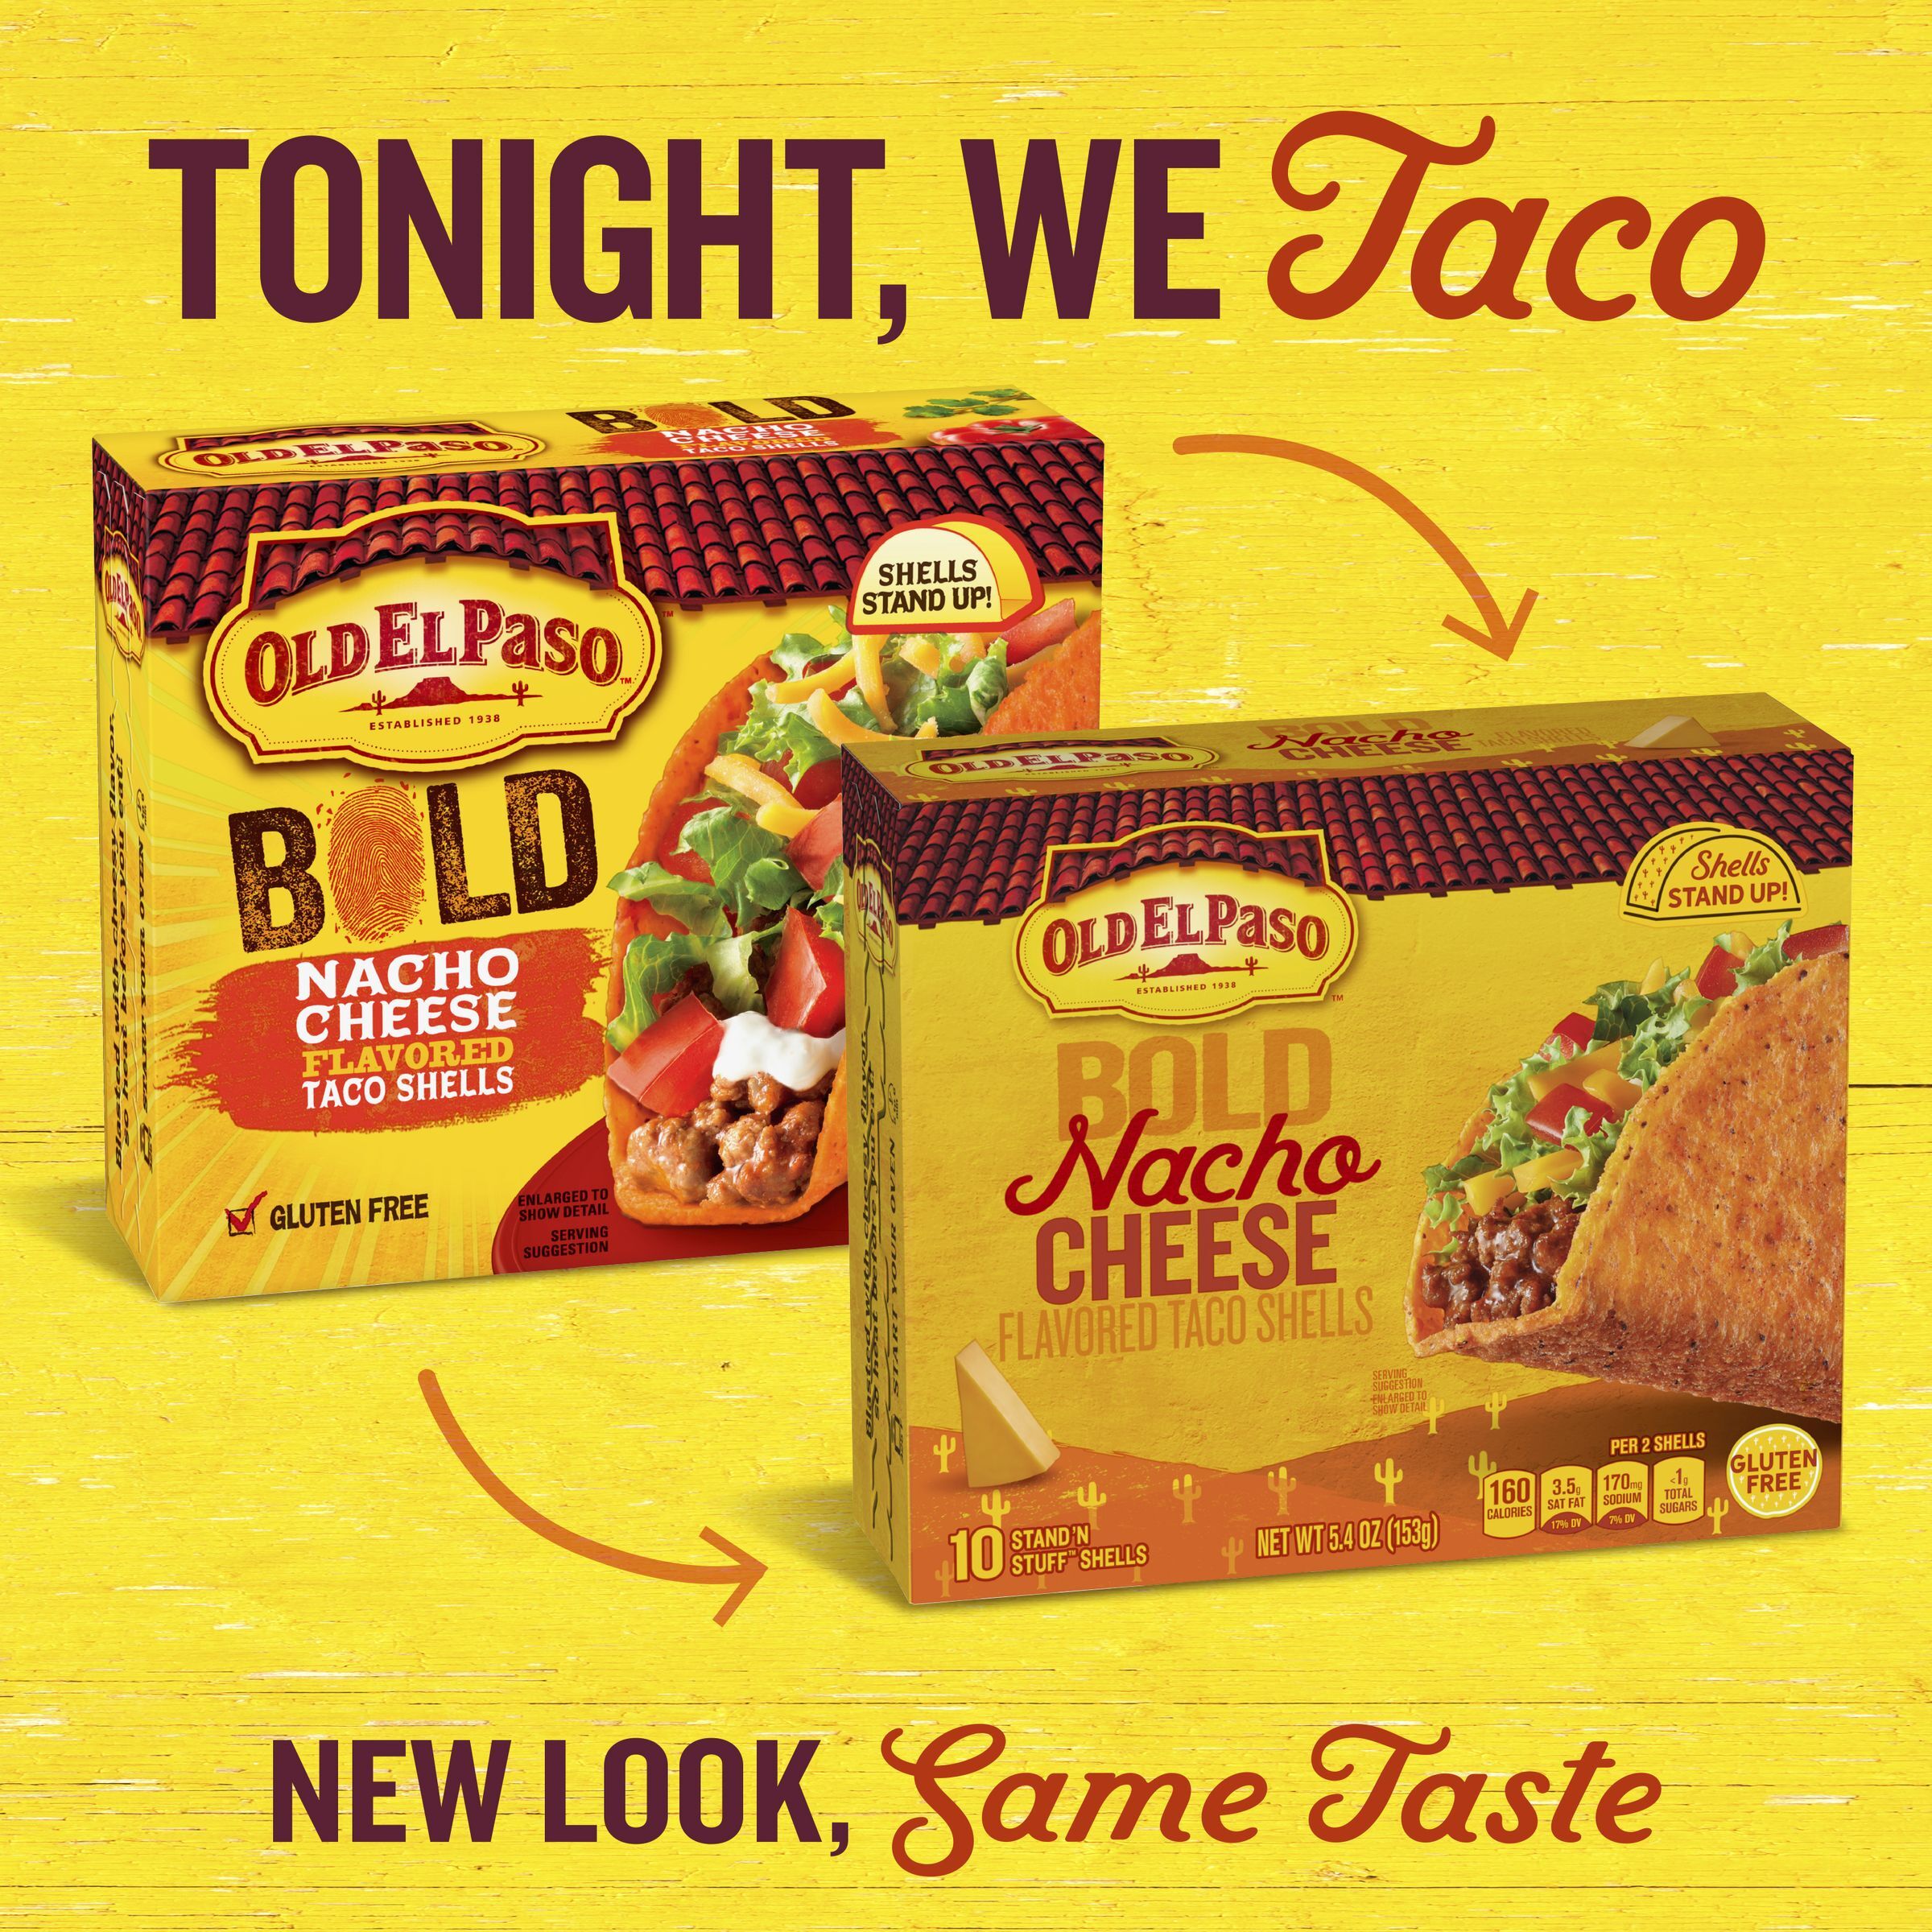 Old El Paso Stand 'N Stuff Bold Nacho Cheese Flavored Taco Shells, 10-Count - image 3 of 11